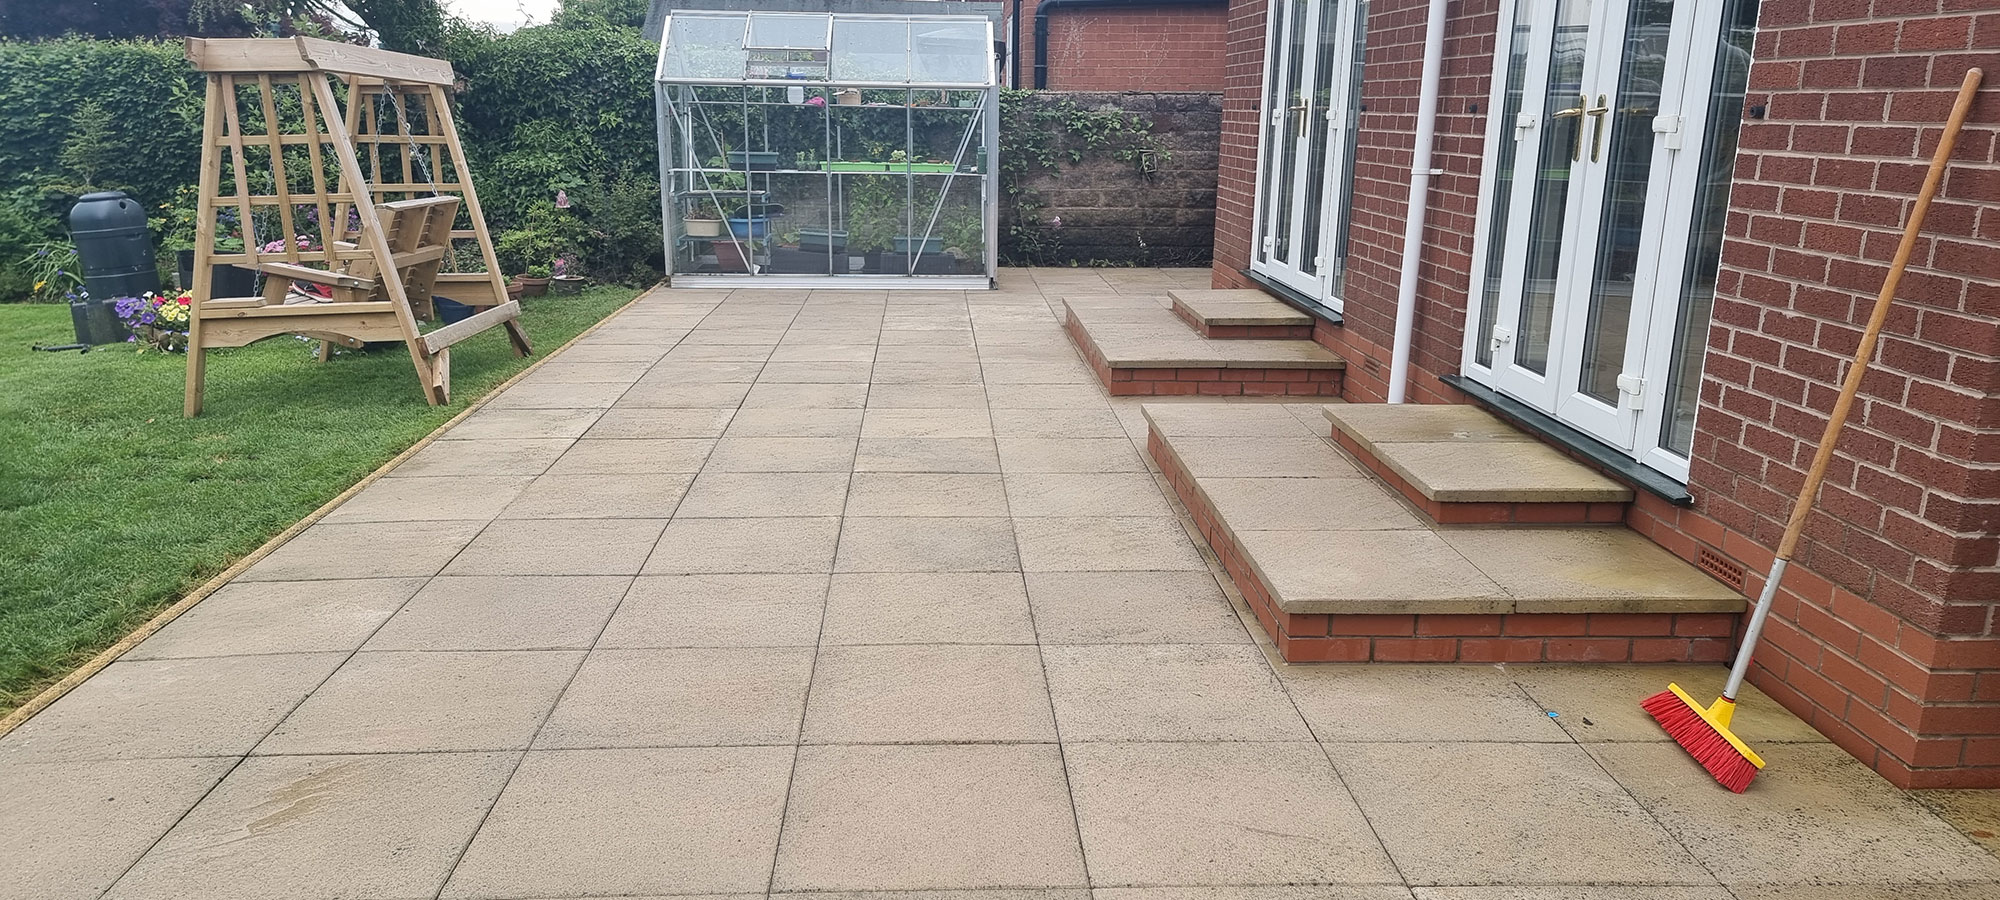 Patio after cleaning